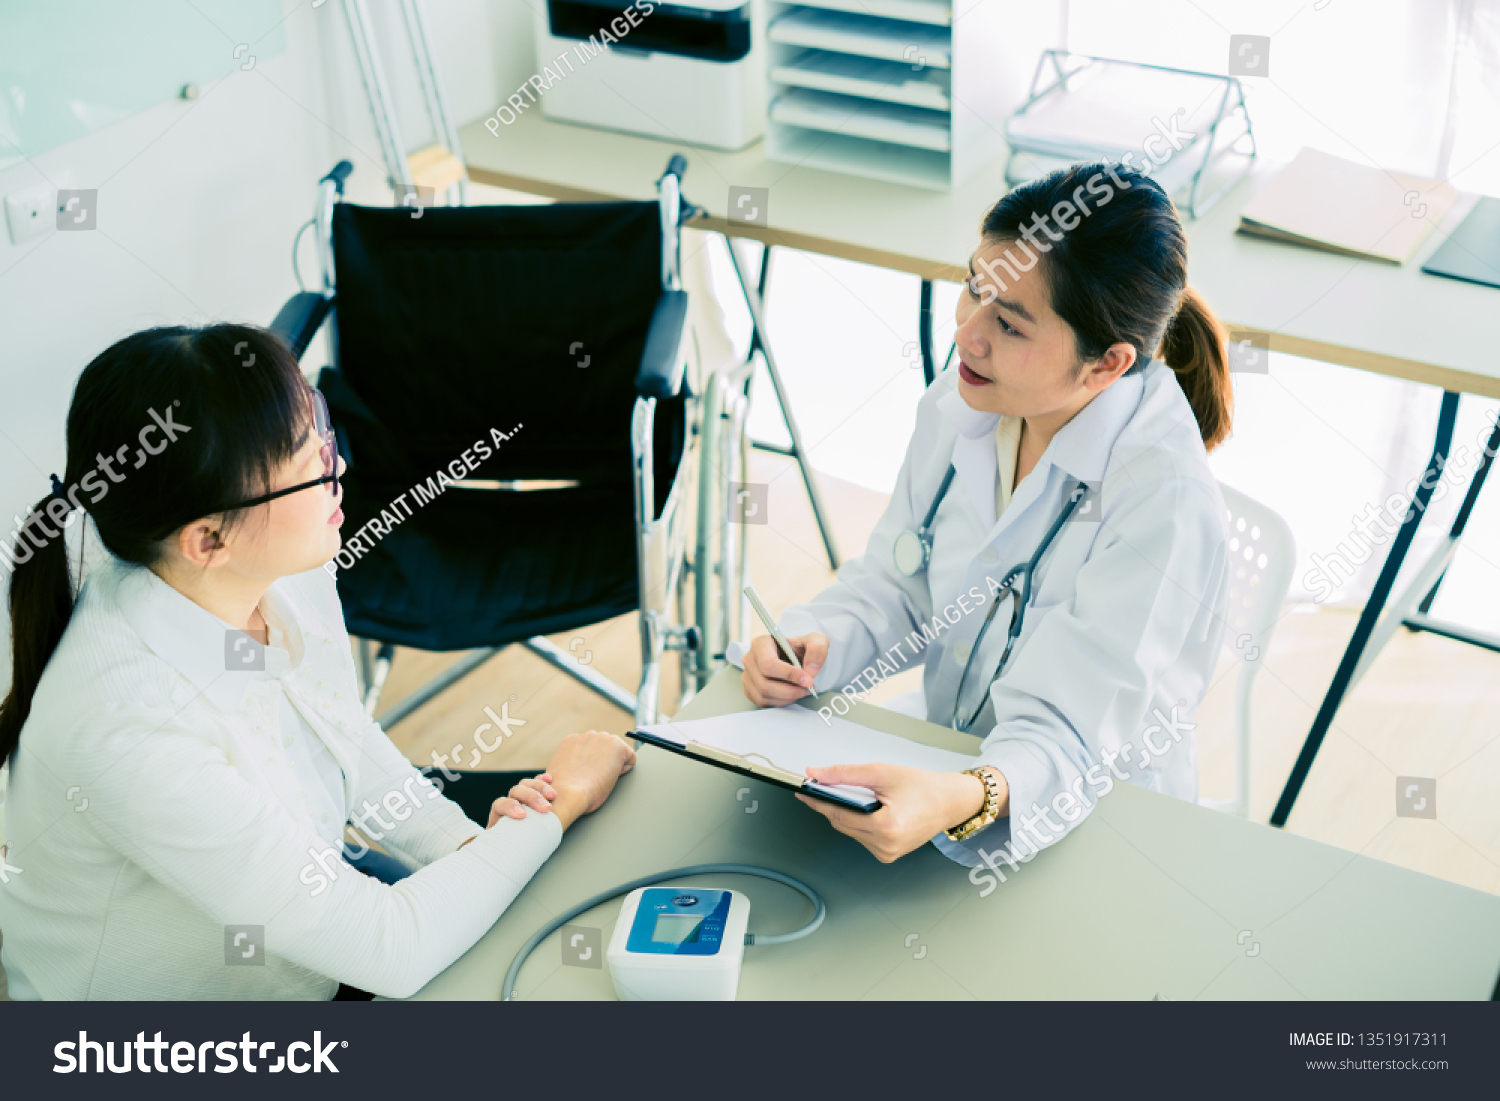 Female doctor consulting patient. Asian people #1351917311